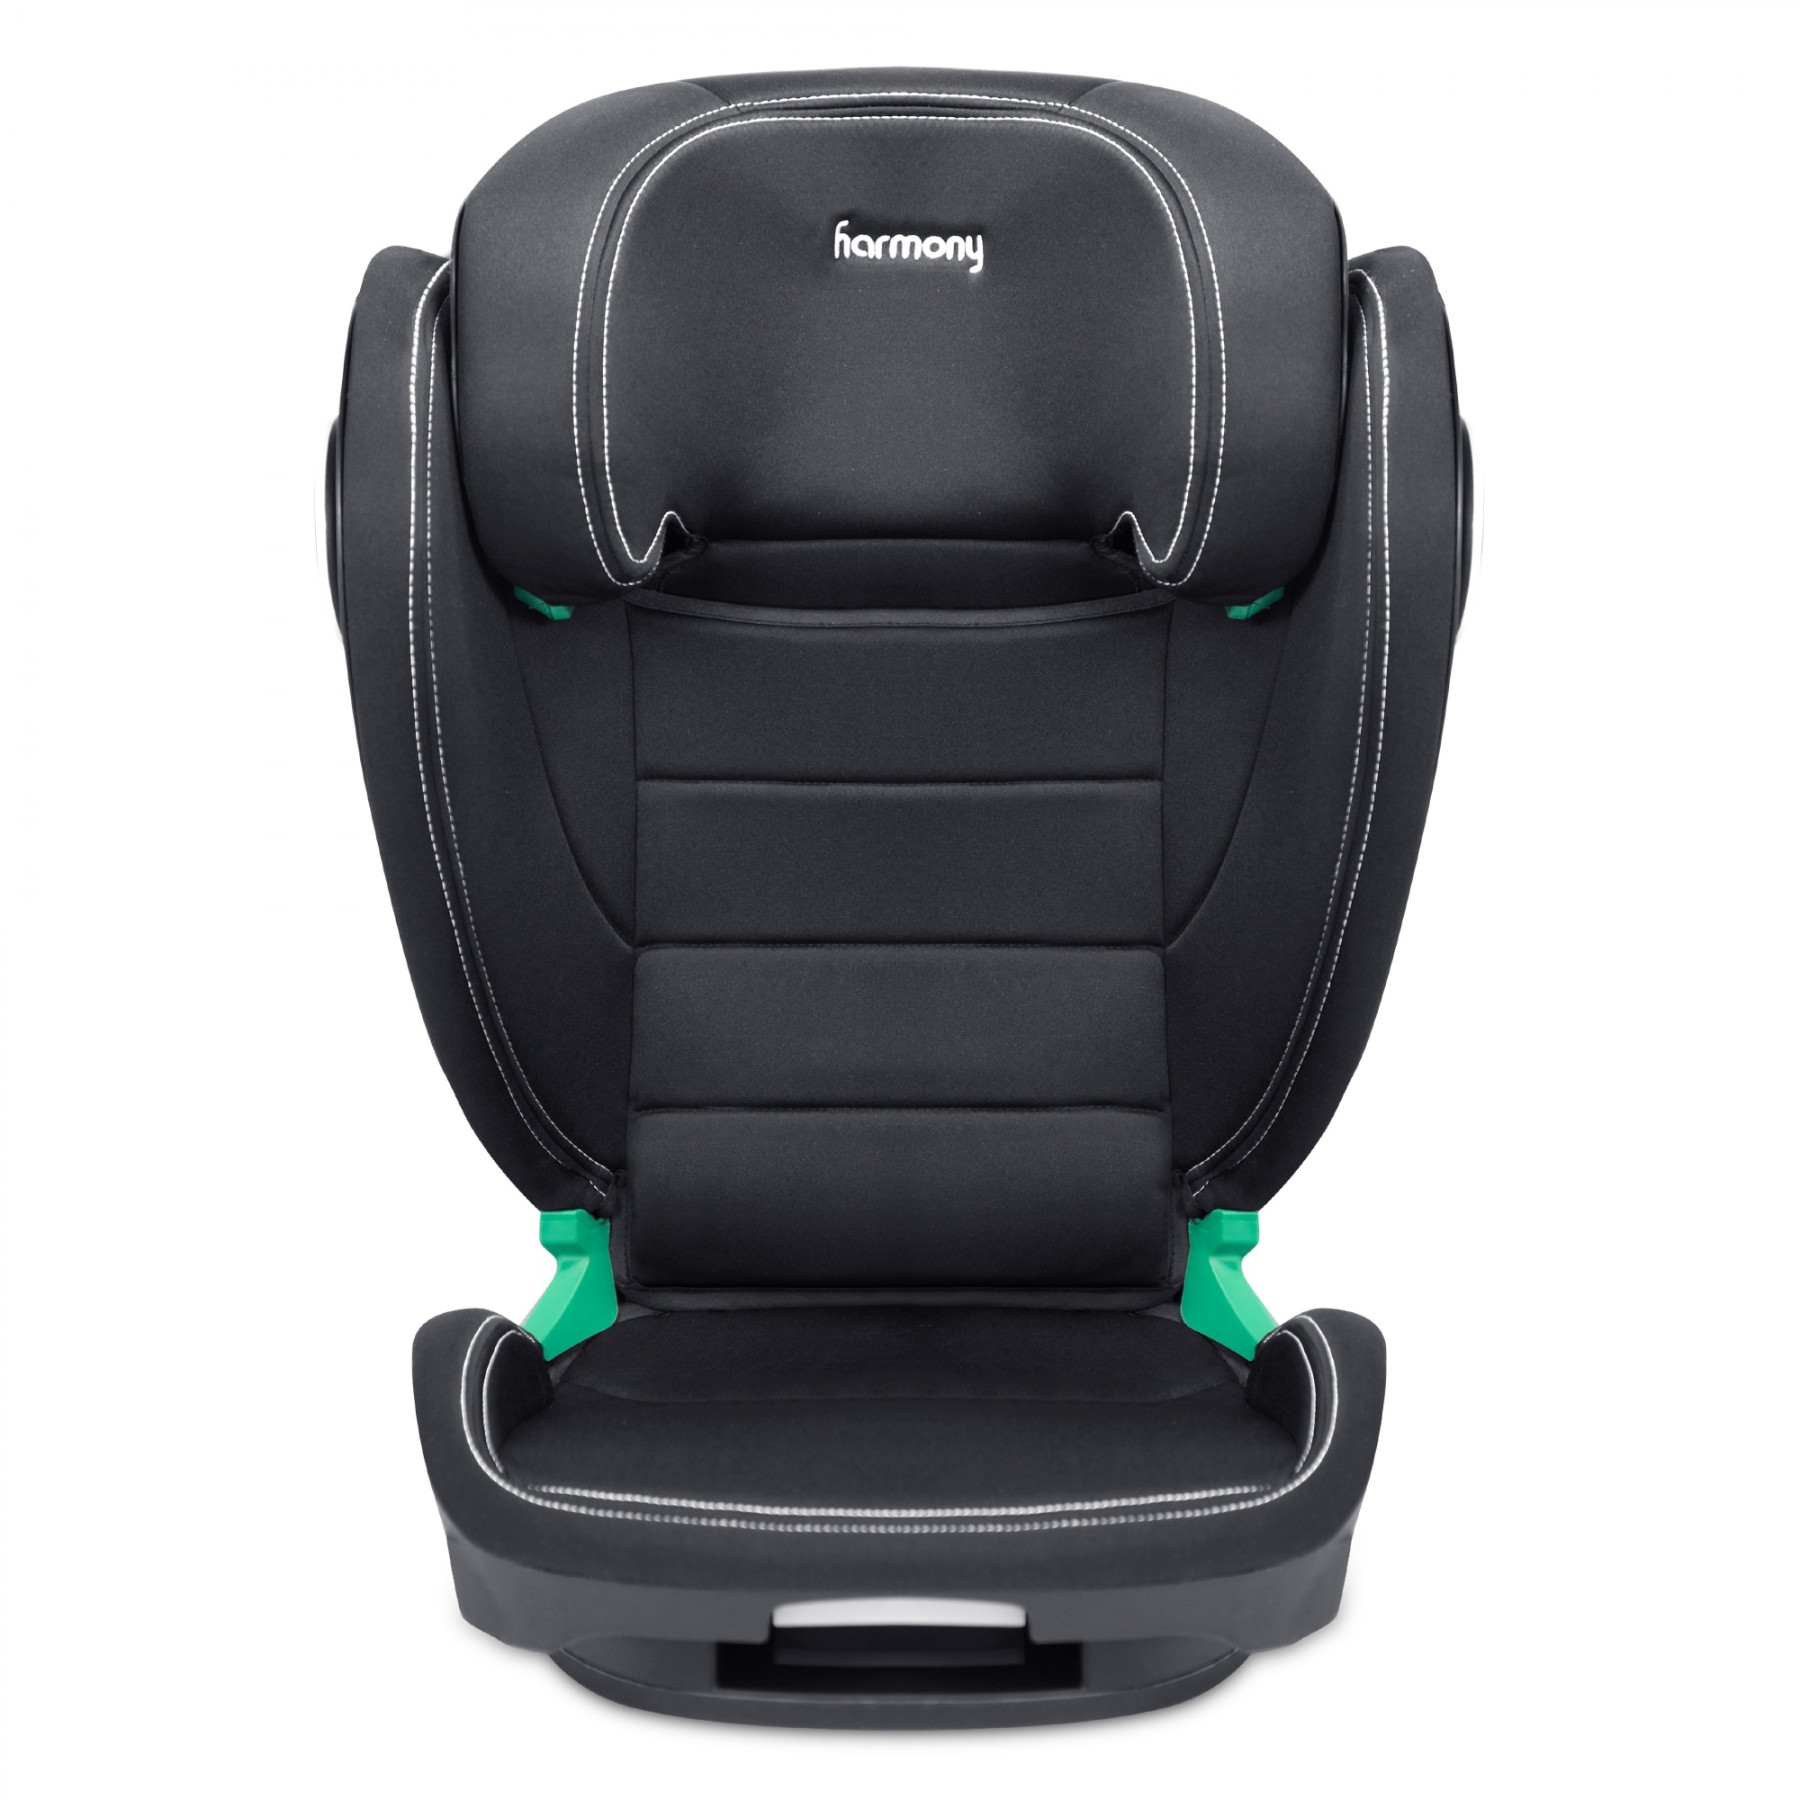 InSight Deluxe i-Size Booster Car Seat with Isofix